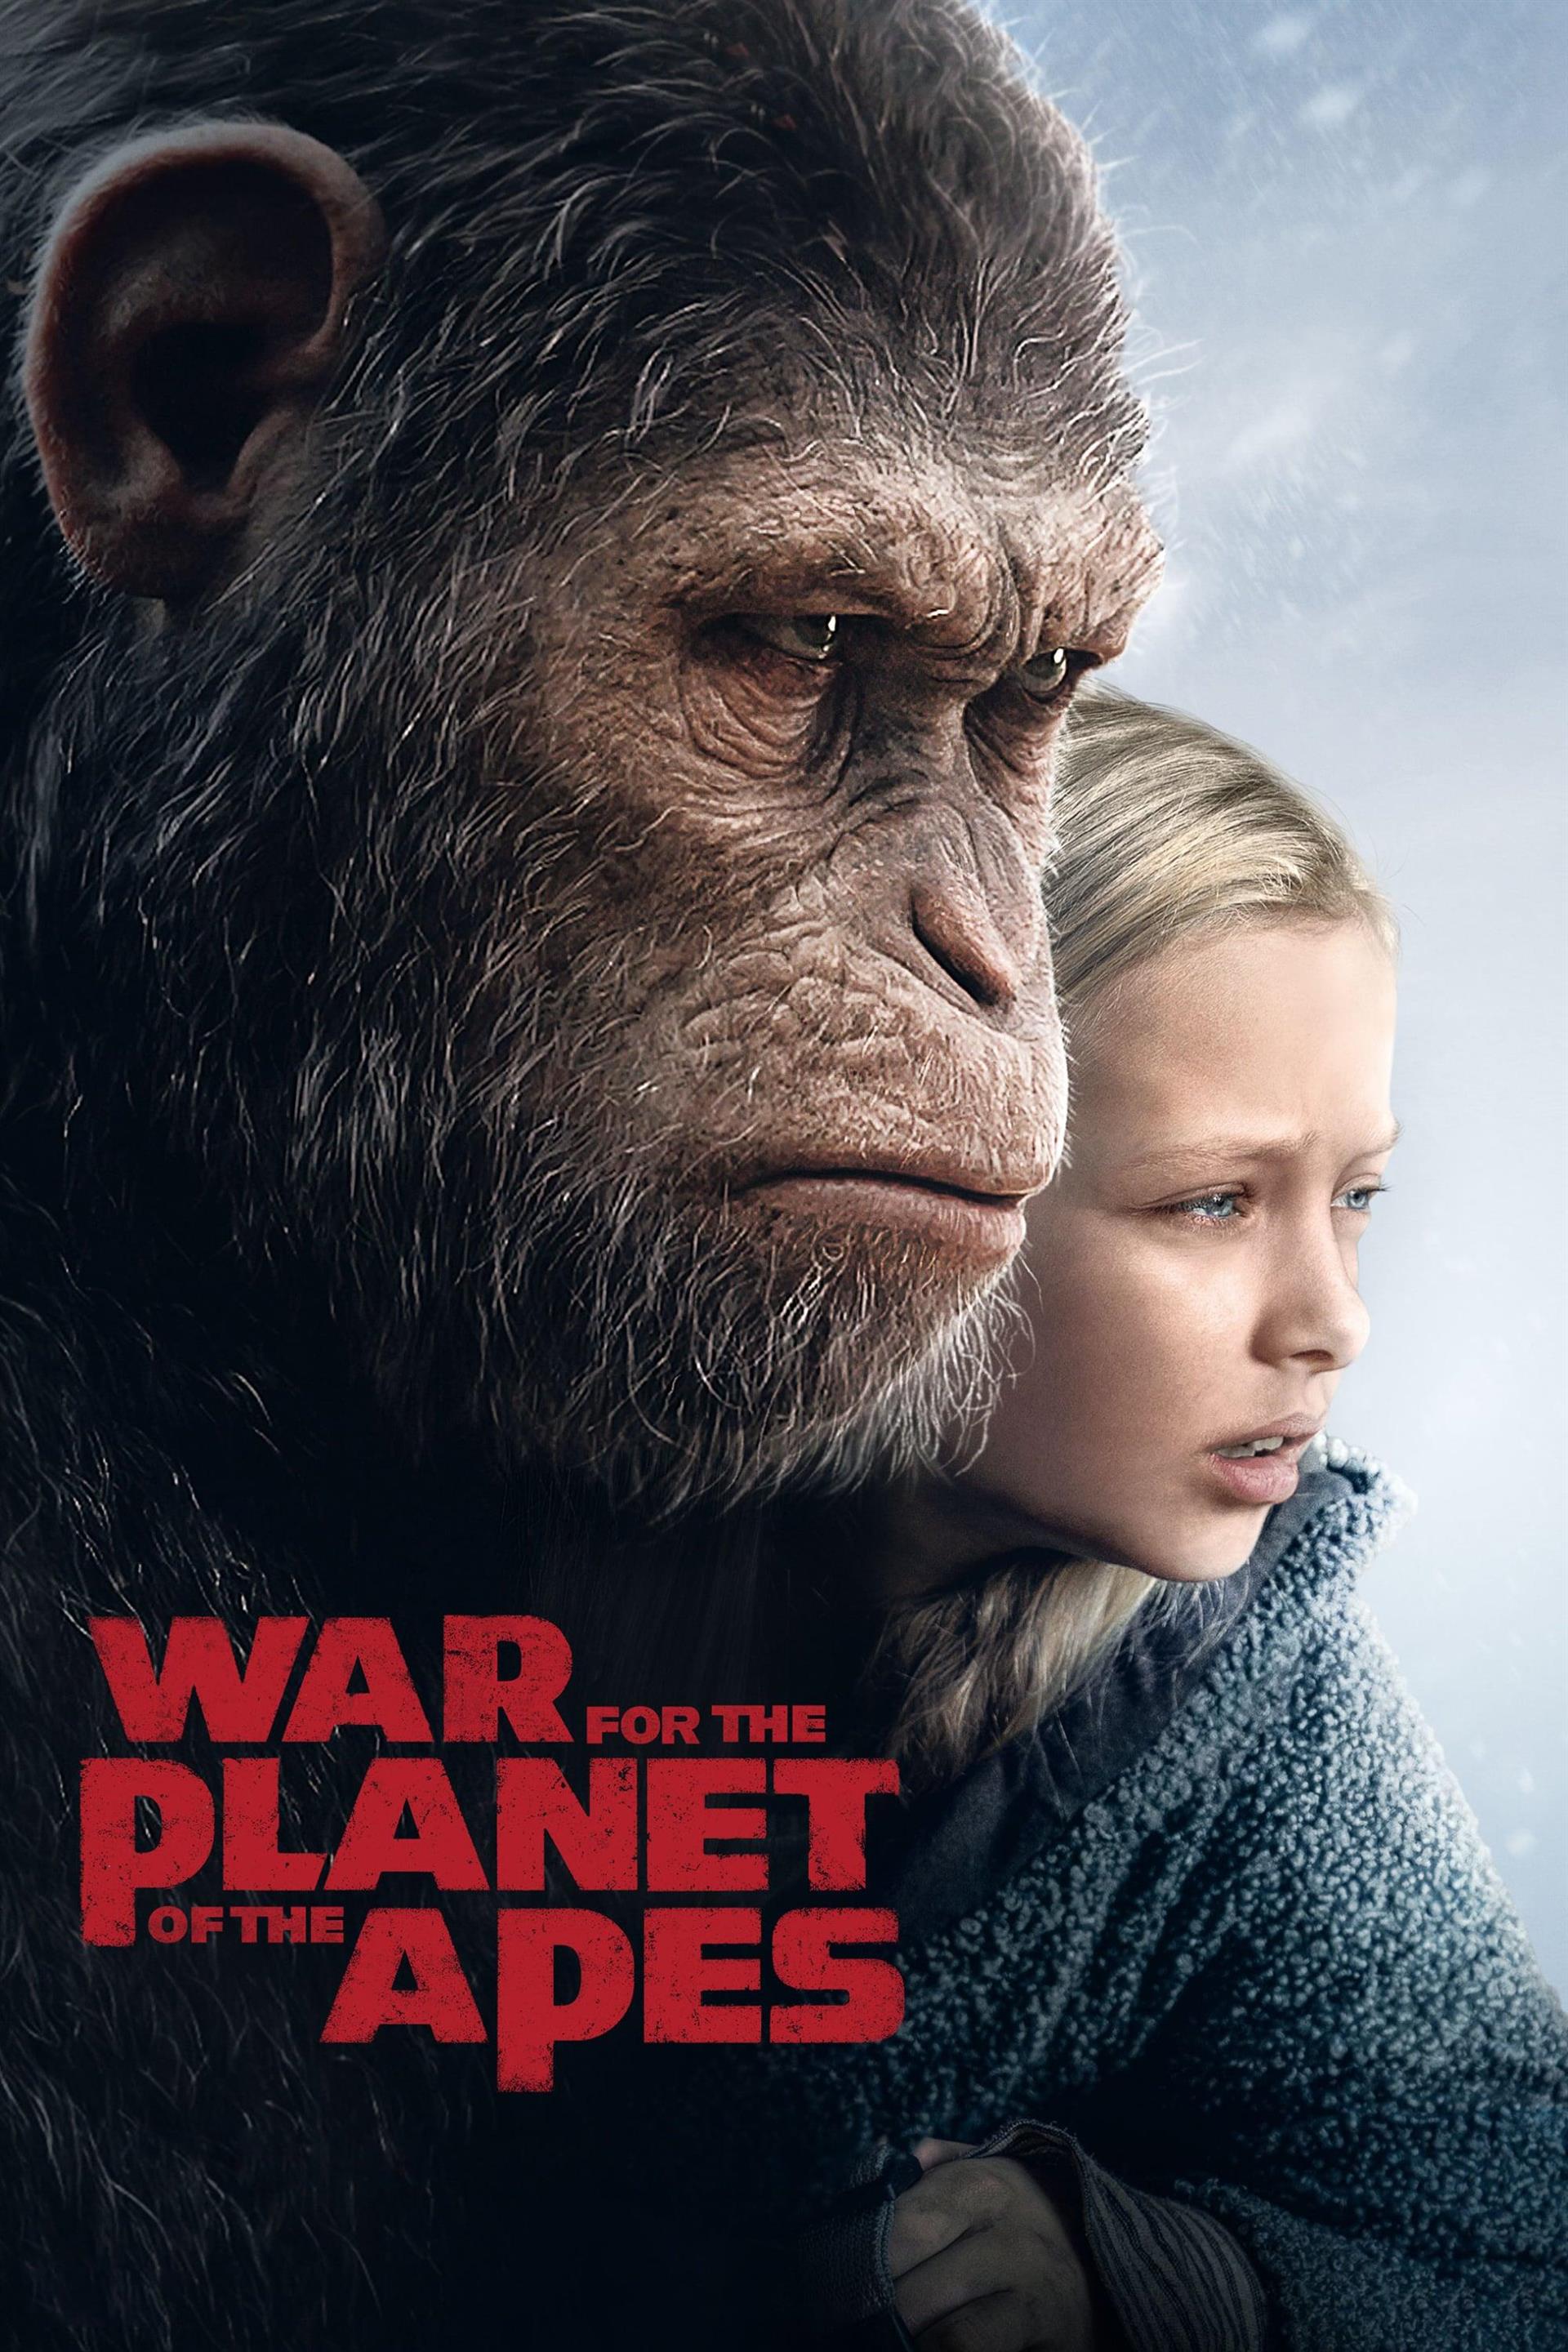 Apes the of the of war planet 'War for